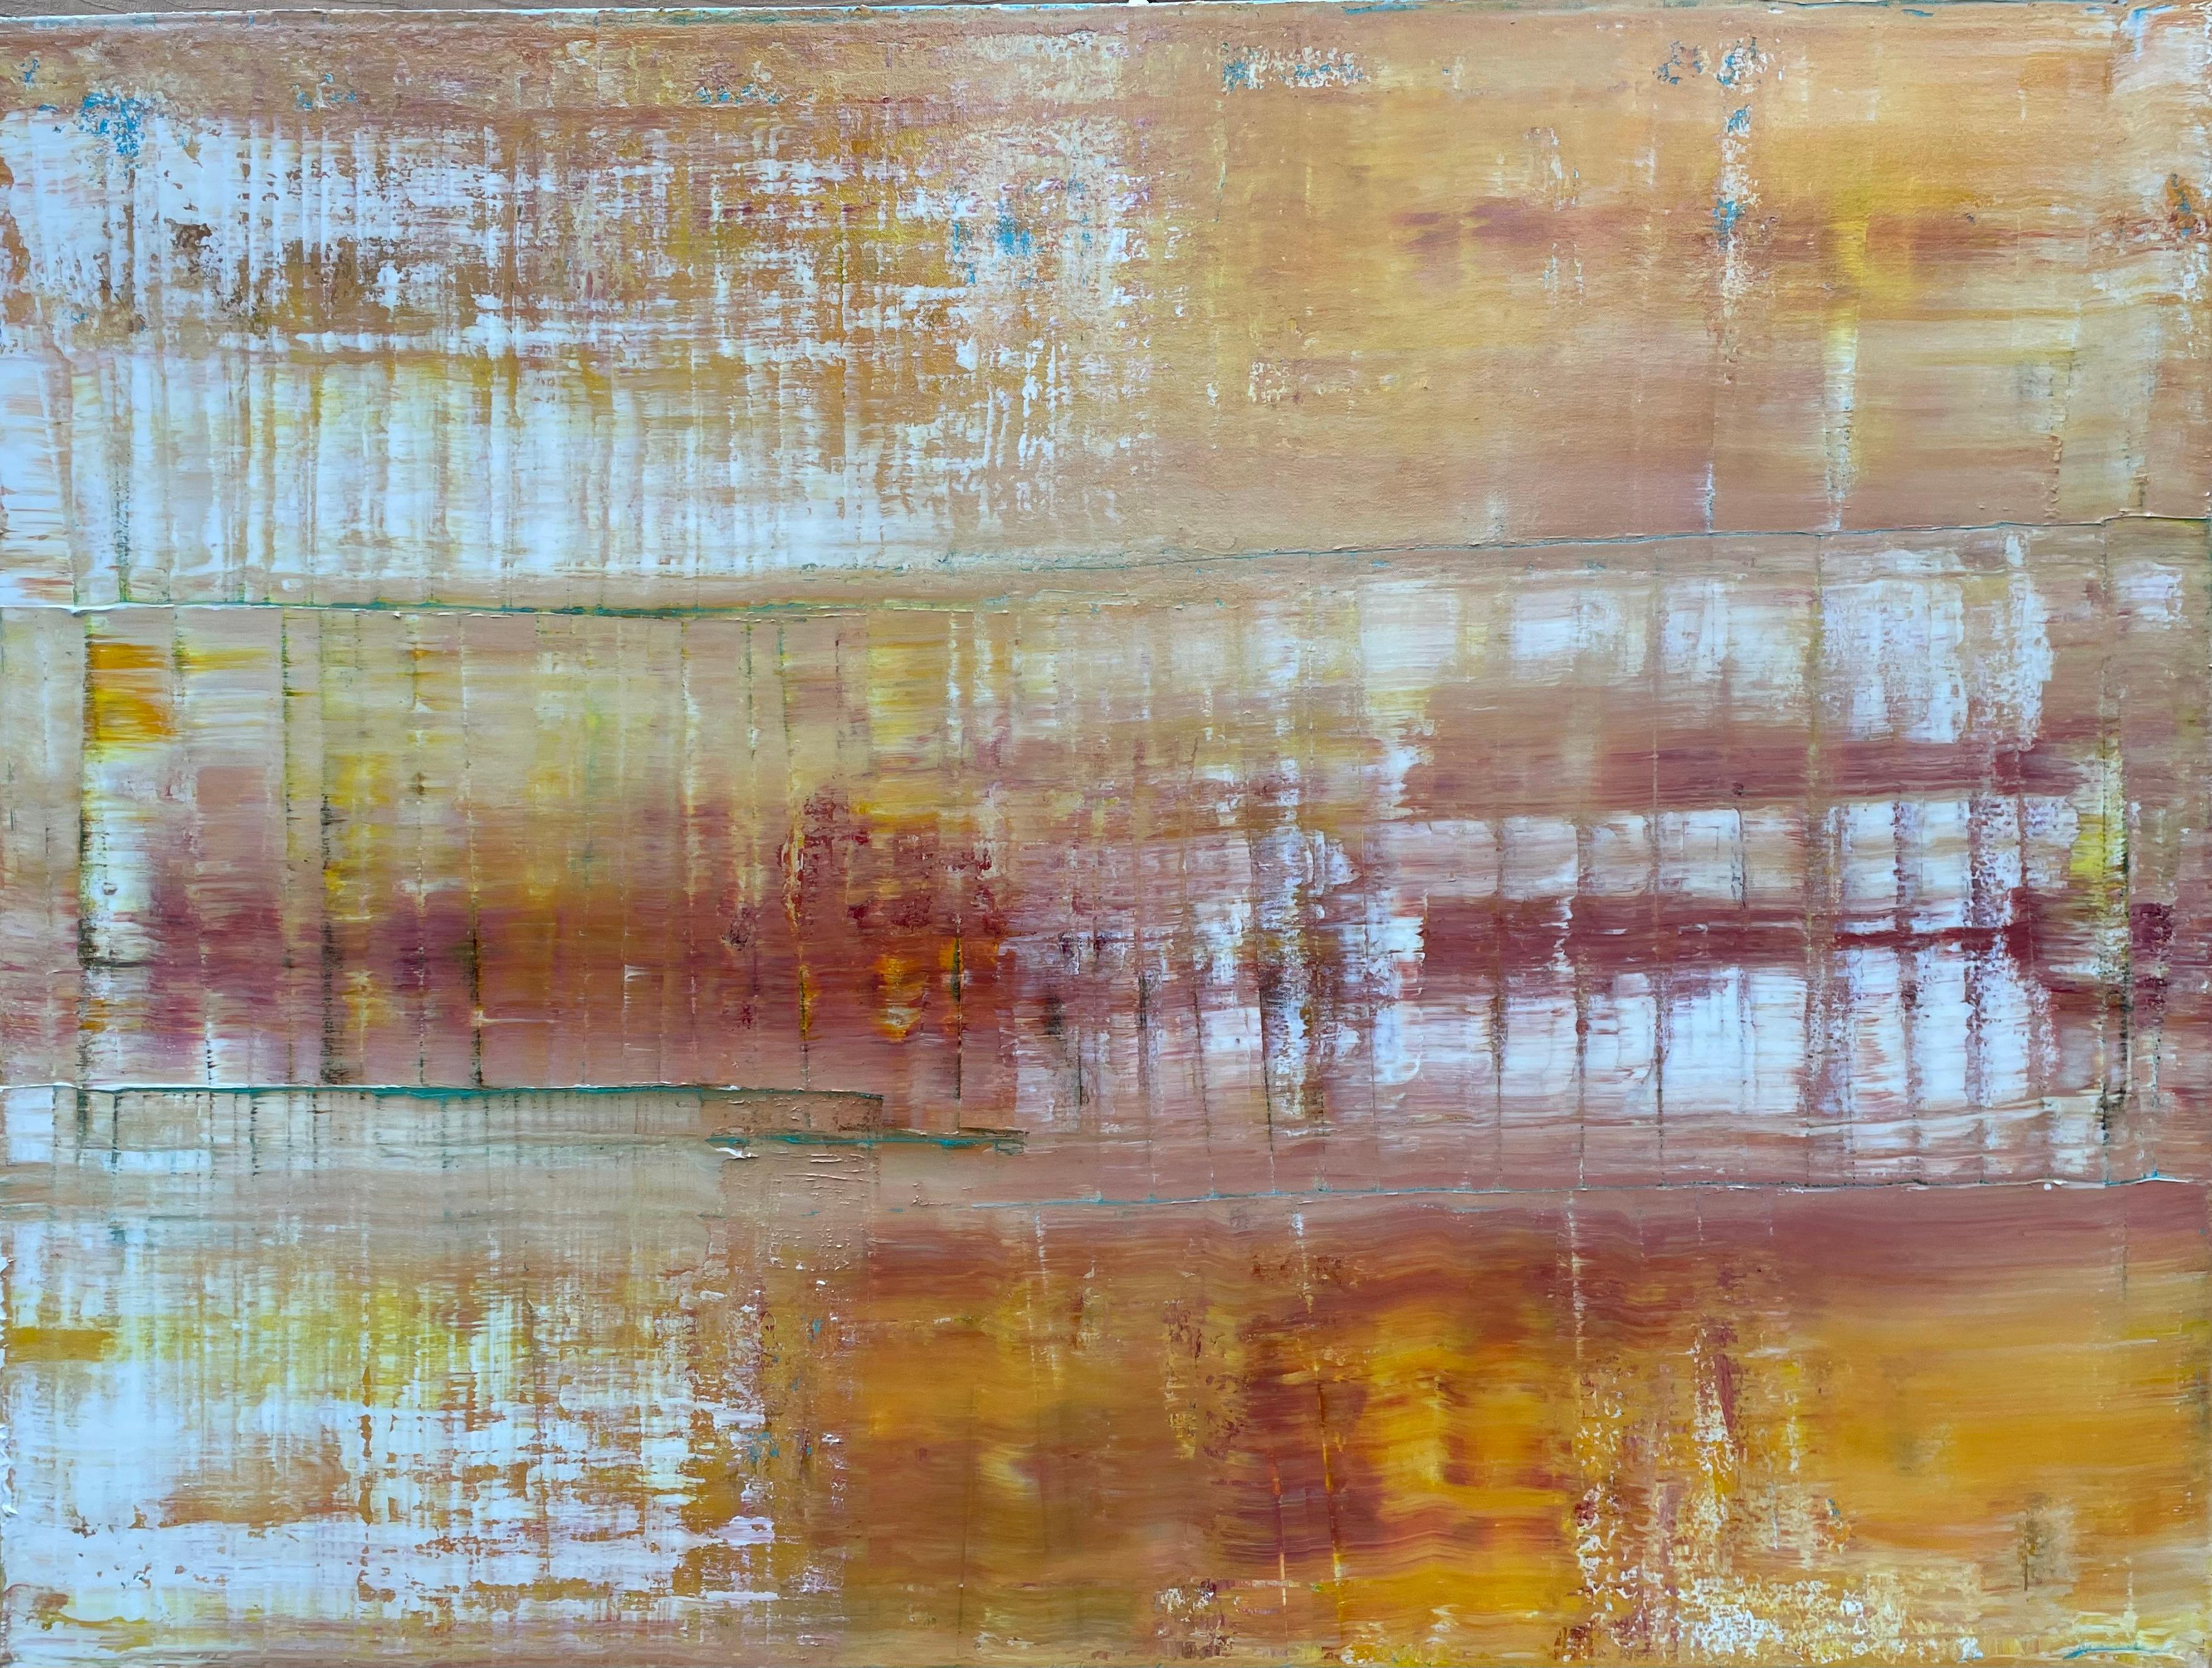 <p>Artist Comments<br>Radiant warmth breaks through the abstract skyscape in artist Jason Astorquia's dramatic work. Soft reds and yellows blend with clouds of white and hints of a darker storm departing. Jason meditates on a focused palette with